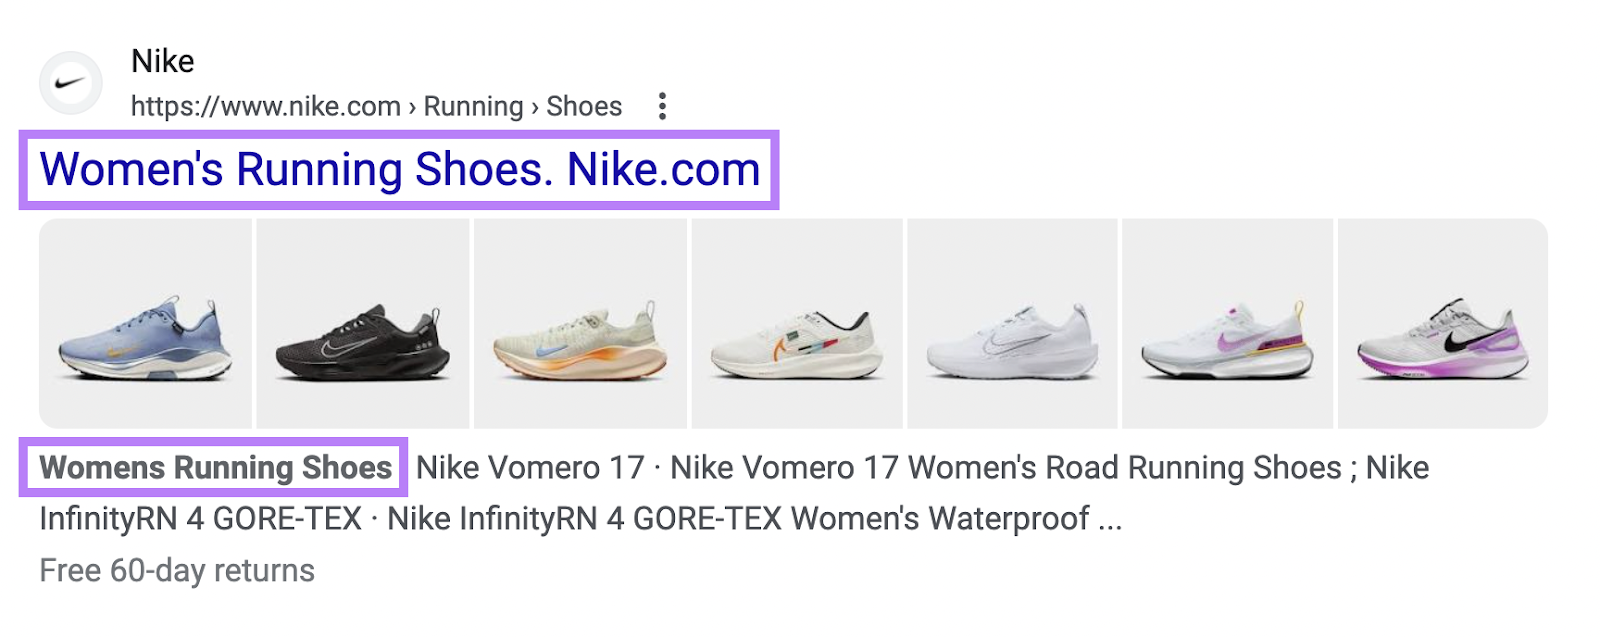 "Women's Running Shoes. Nike.com" result on SERP with "Womens Running Shoes" meta tag